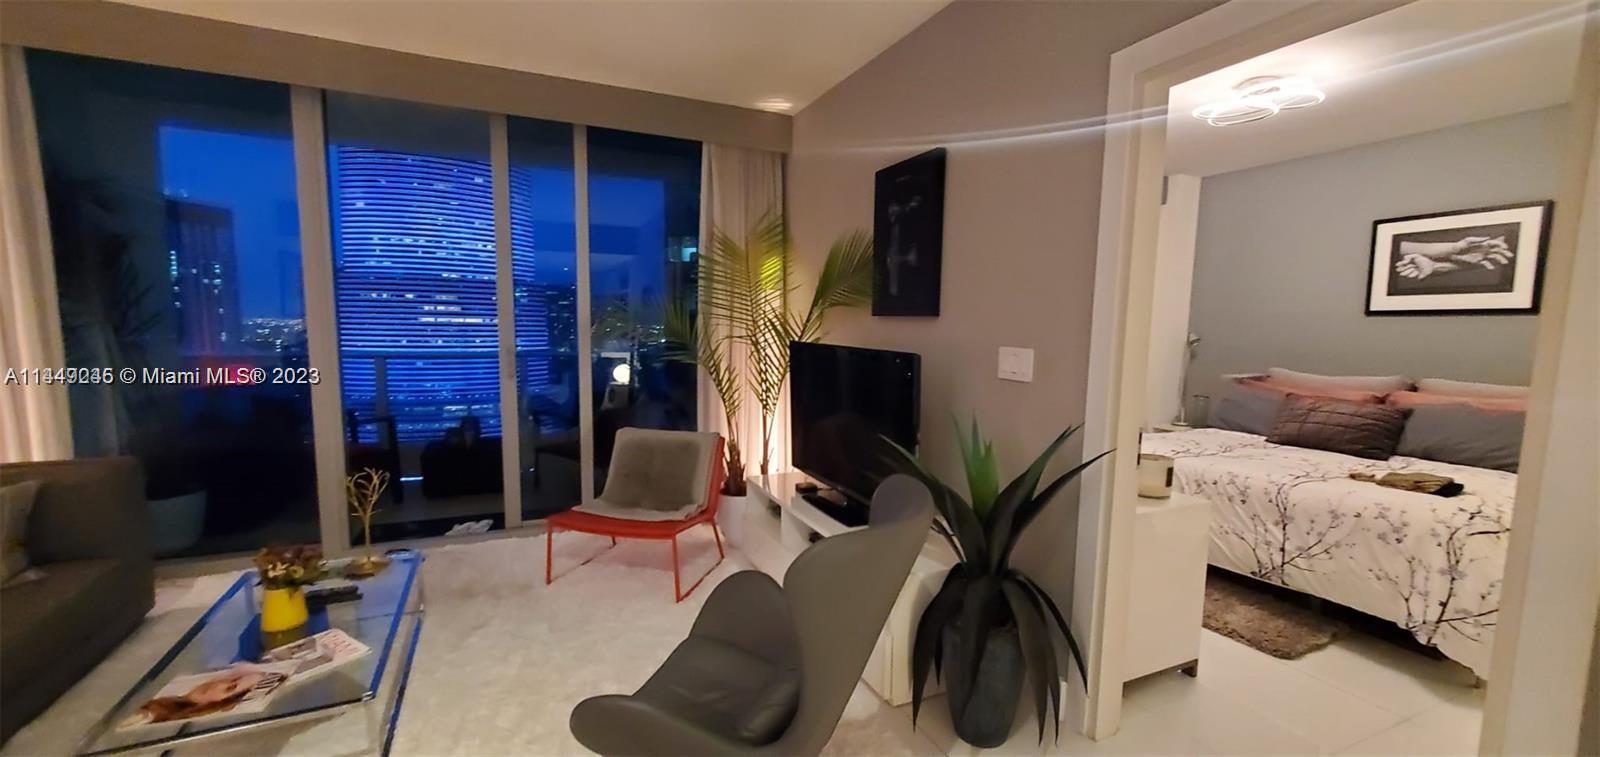 Gorgeous furnished modern unit with many custom designer-added features such as lighting,exterior fu